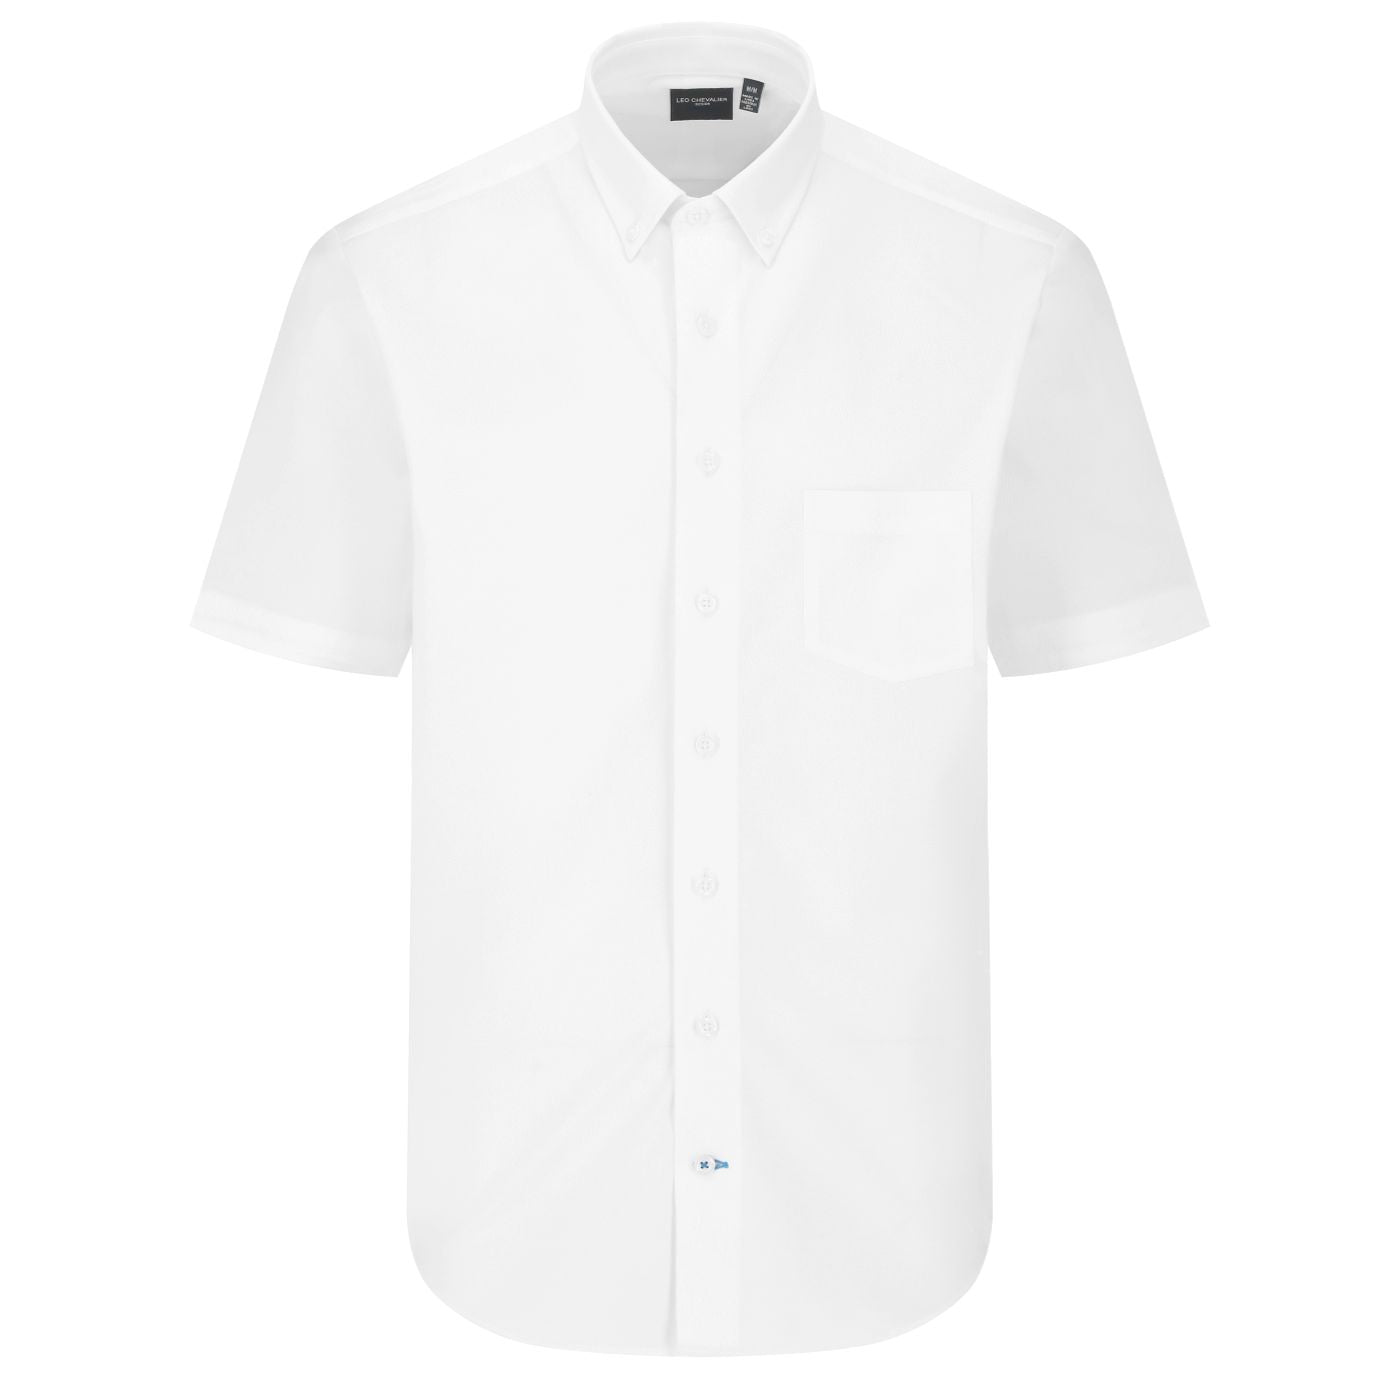 White Pique Knit Short Sleeve Sport Shirt with Button Down Collar by Leo Chevalier